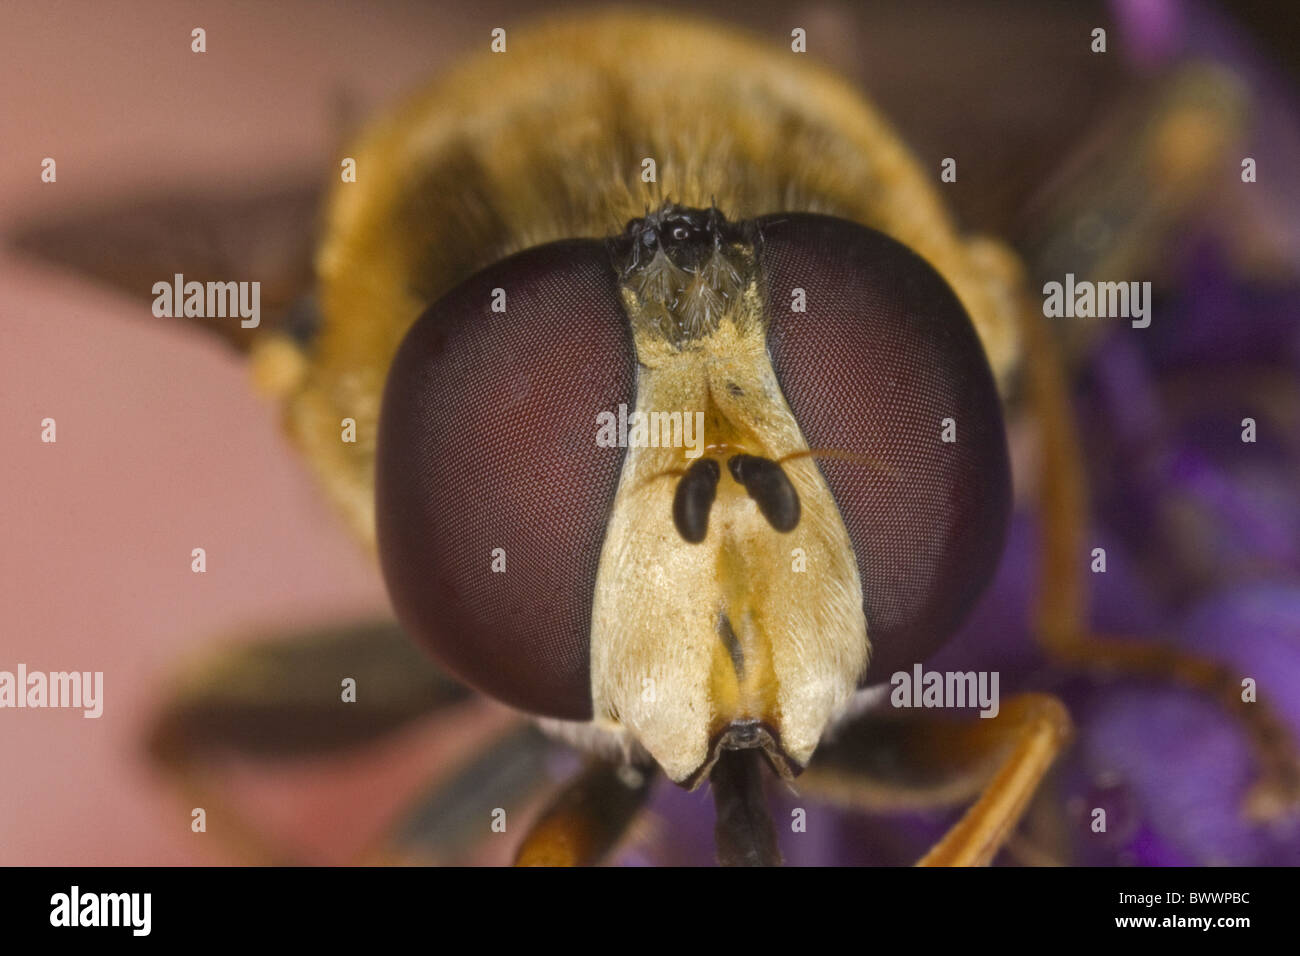 Hoverfly Syrphidae sp. adult close-up head with Stock Photo